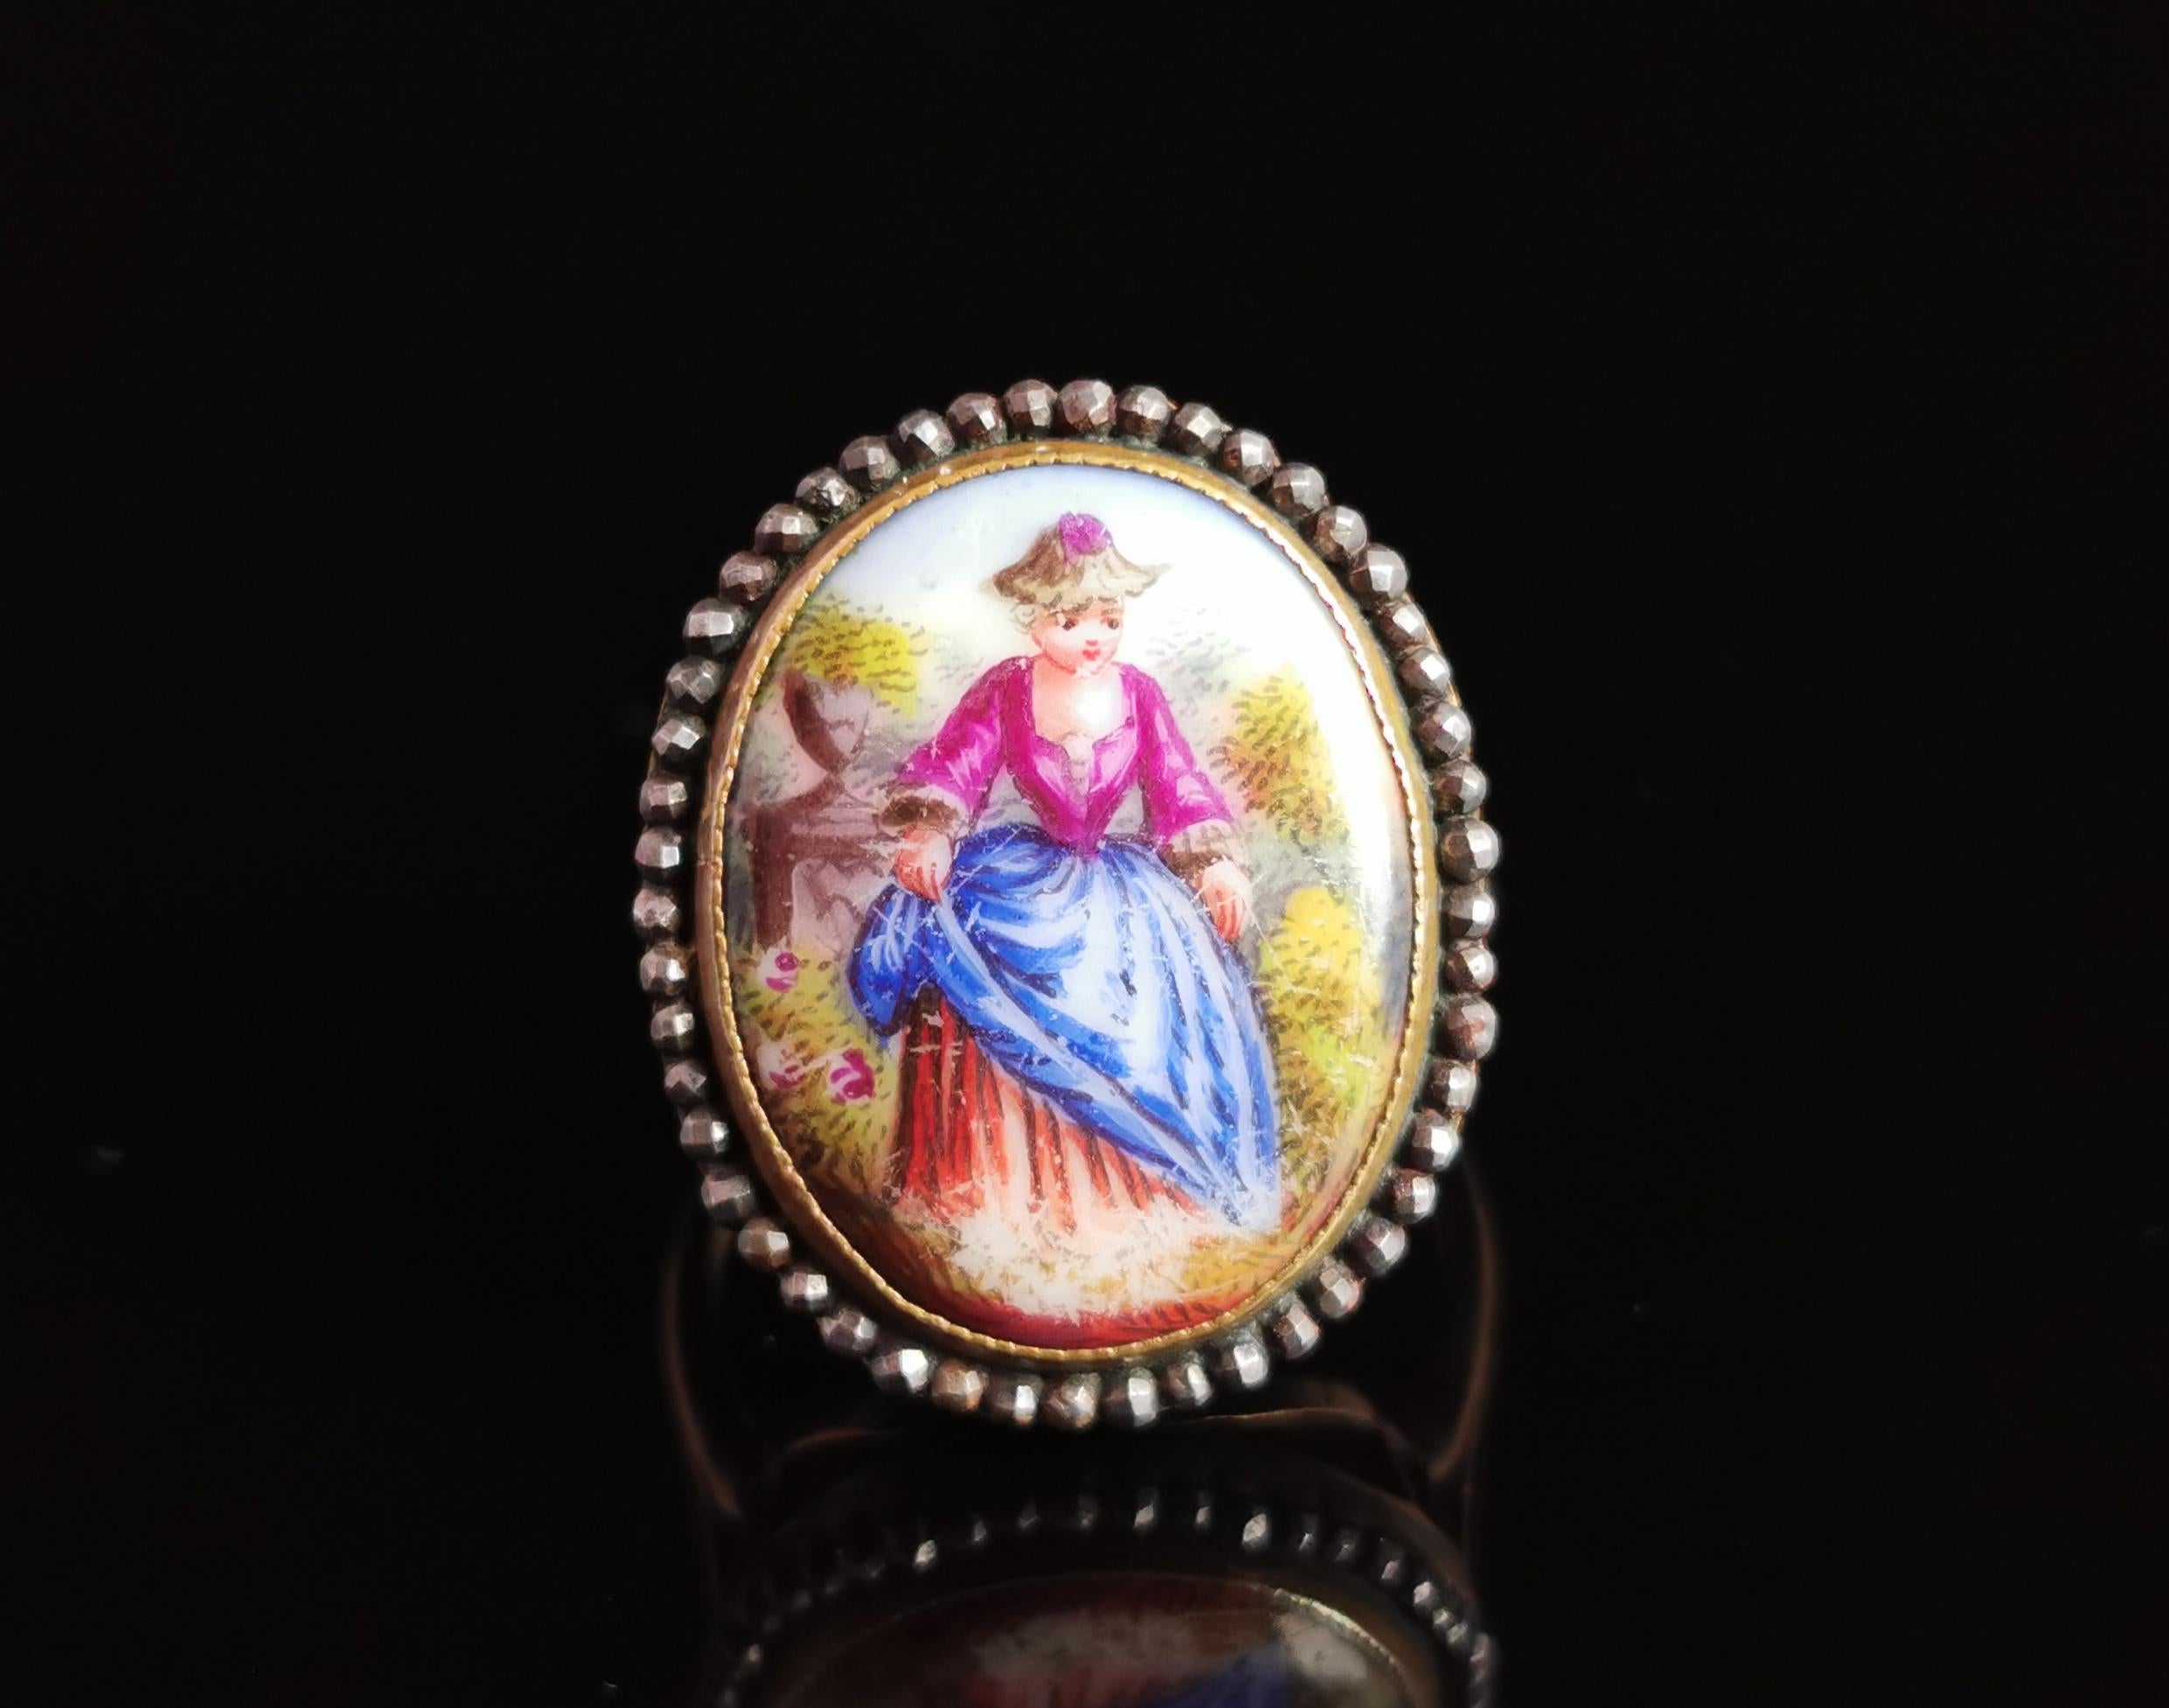 Antique Enamelled Portrait Ring, 9k Gold, Cut Steel and Mother of Pearl 5